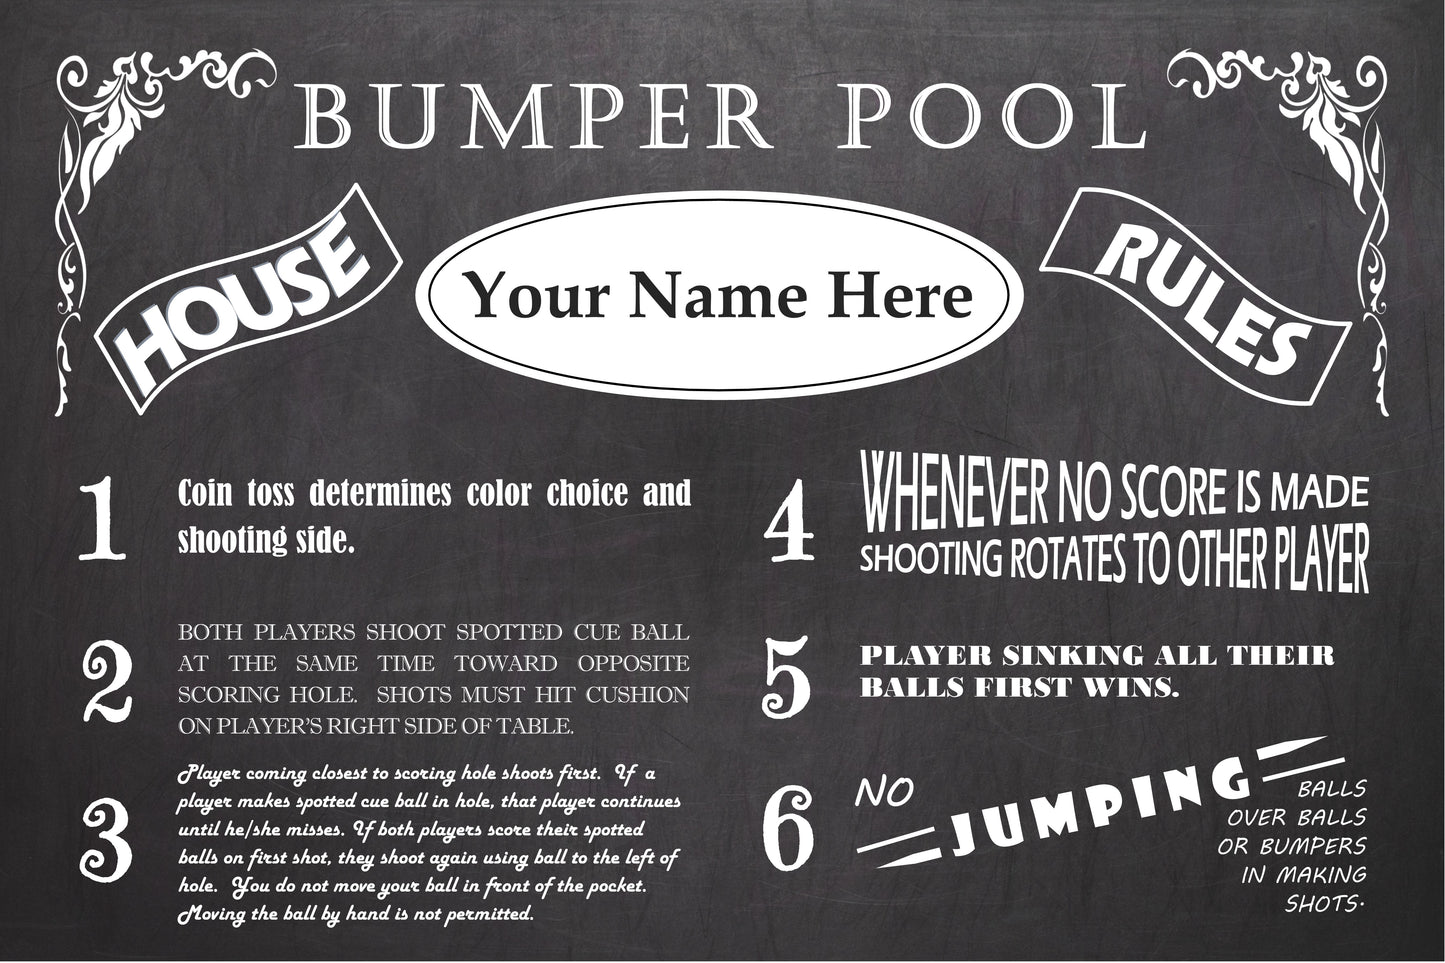 Vintage Bumper Pool Personalized House Rules Poster Customized With Your Name!